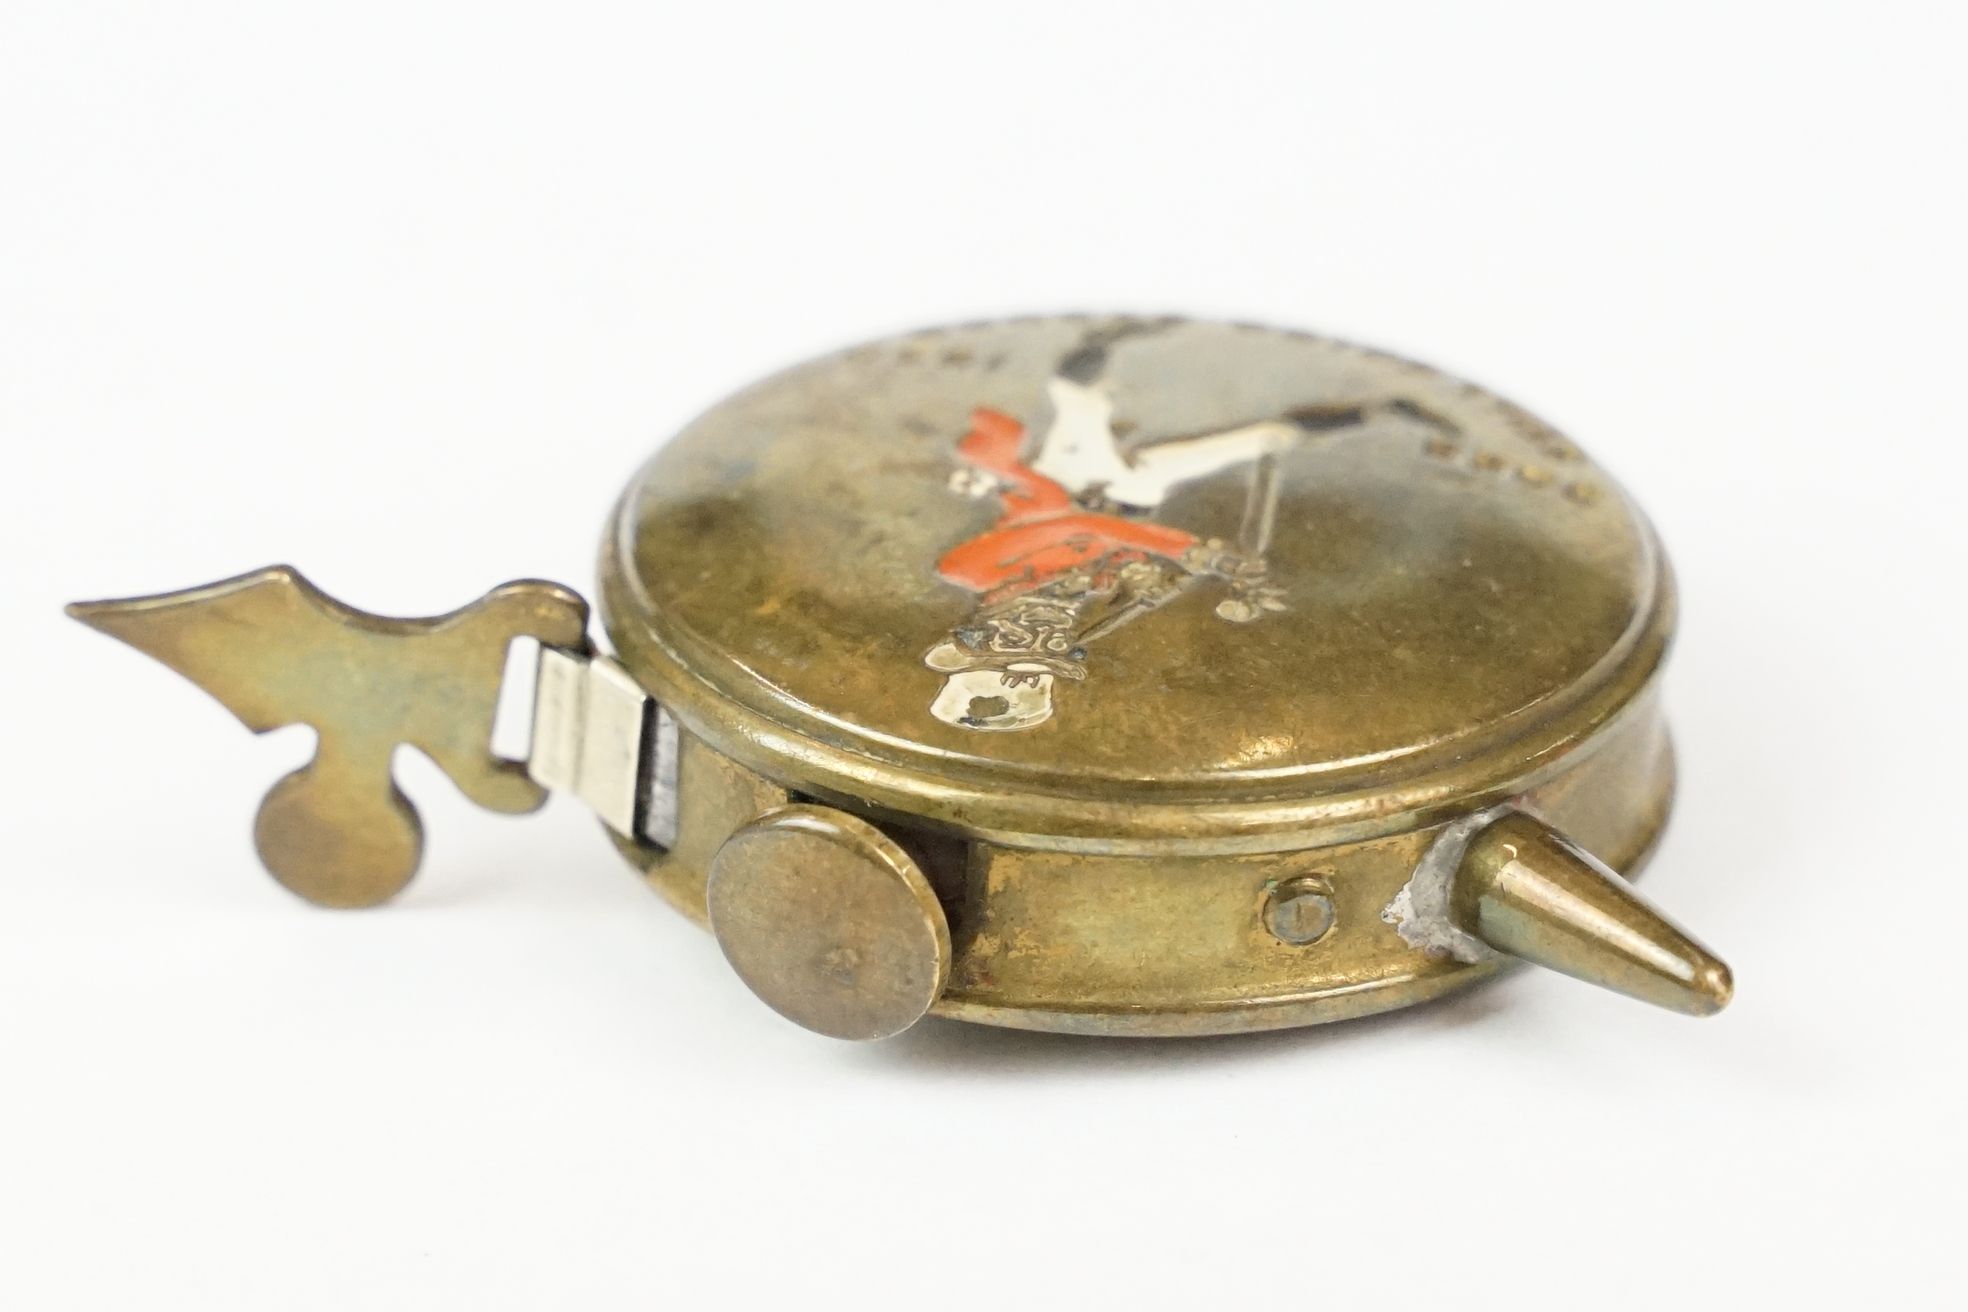 Early 20th century ' Johnnie Walker ' Whiskey Enamelled Bowls Tape Measure marked ' born 1820, still - Image 4 of 6